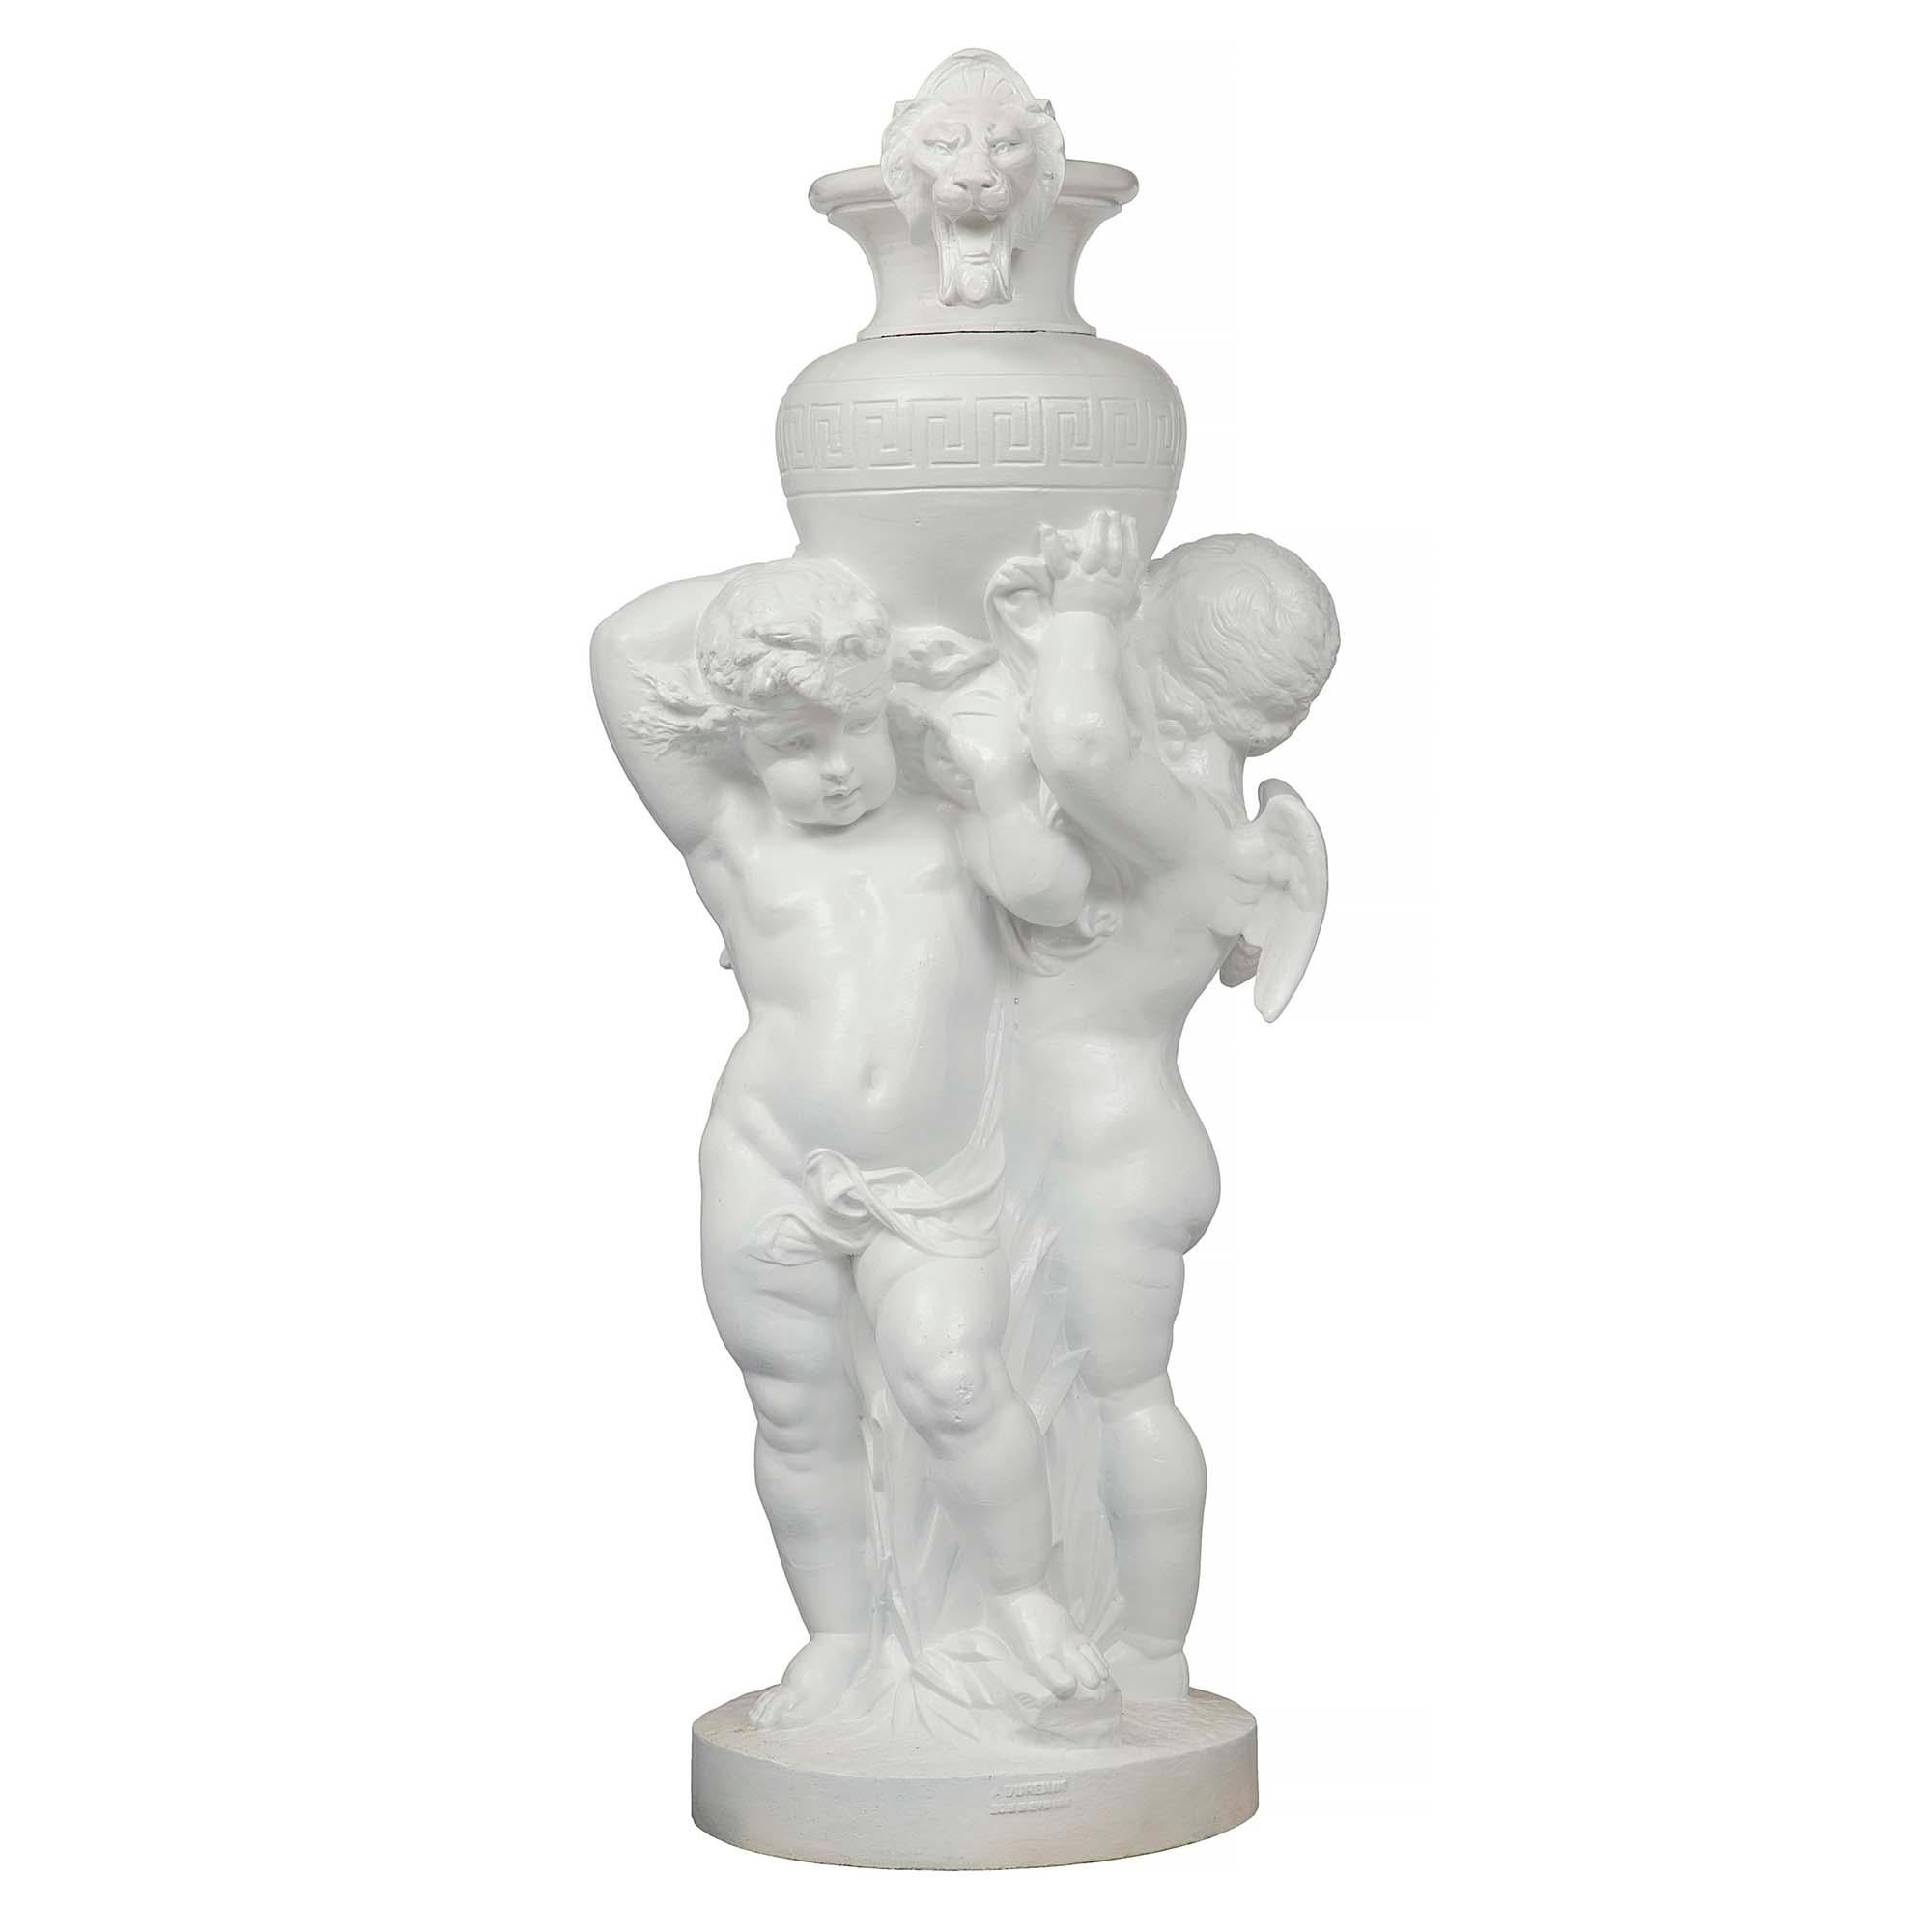 A large-scaled and most charming French 19th century Louis XVI st. cast iron grouping of two winged cherubs holding an urn. The cast iron statue is signed Antoine Durenne in the front and signed a second time in the back. One cherub looking in one